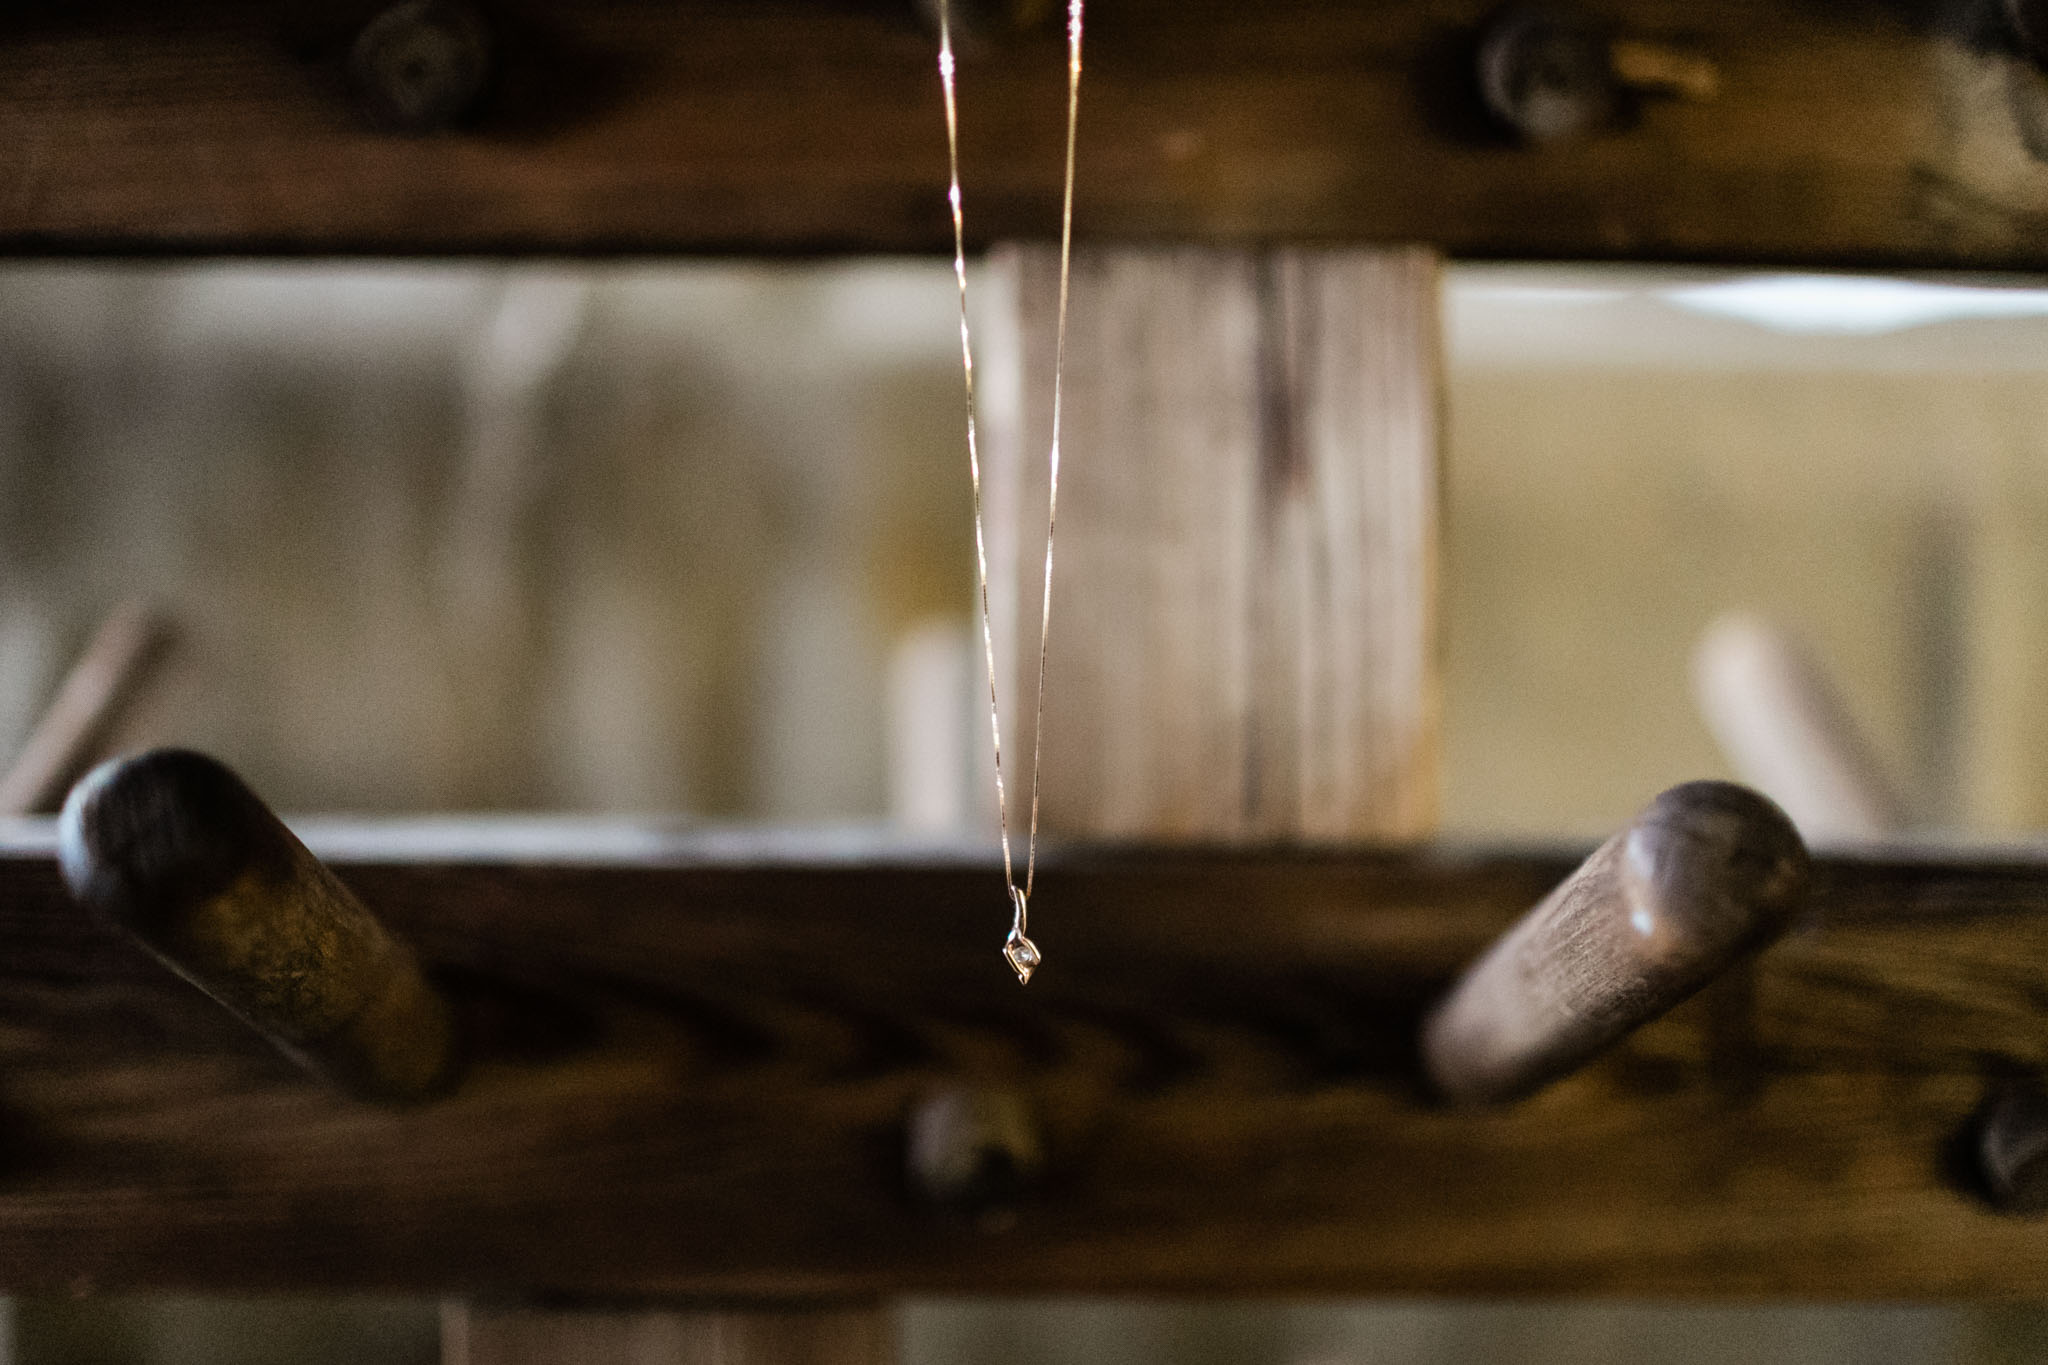 Haw River Ballroom Wedding | Durham Photographer | By G. Lin Photography | Gold necklace hanging on wooden peg